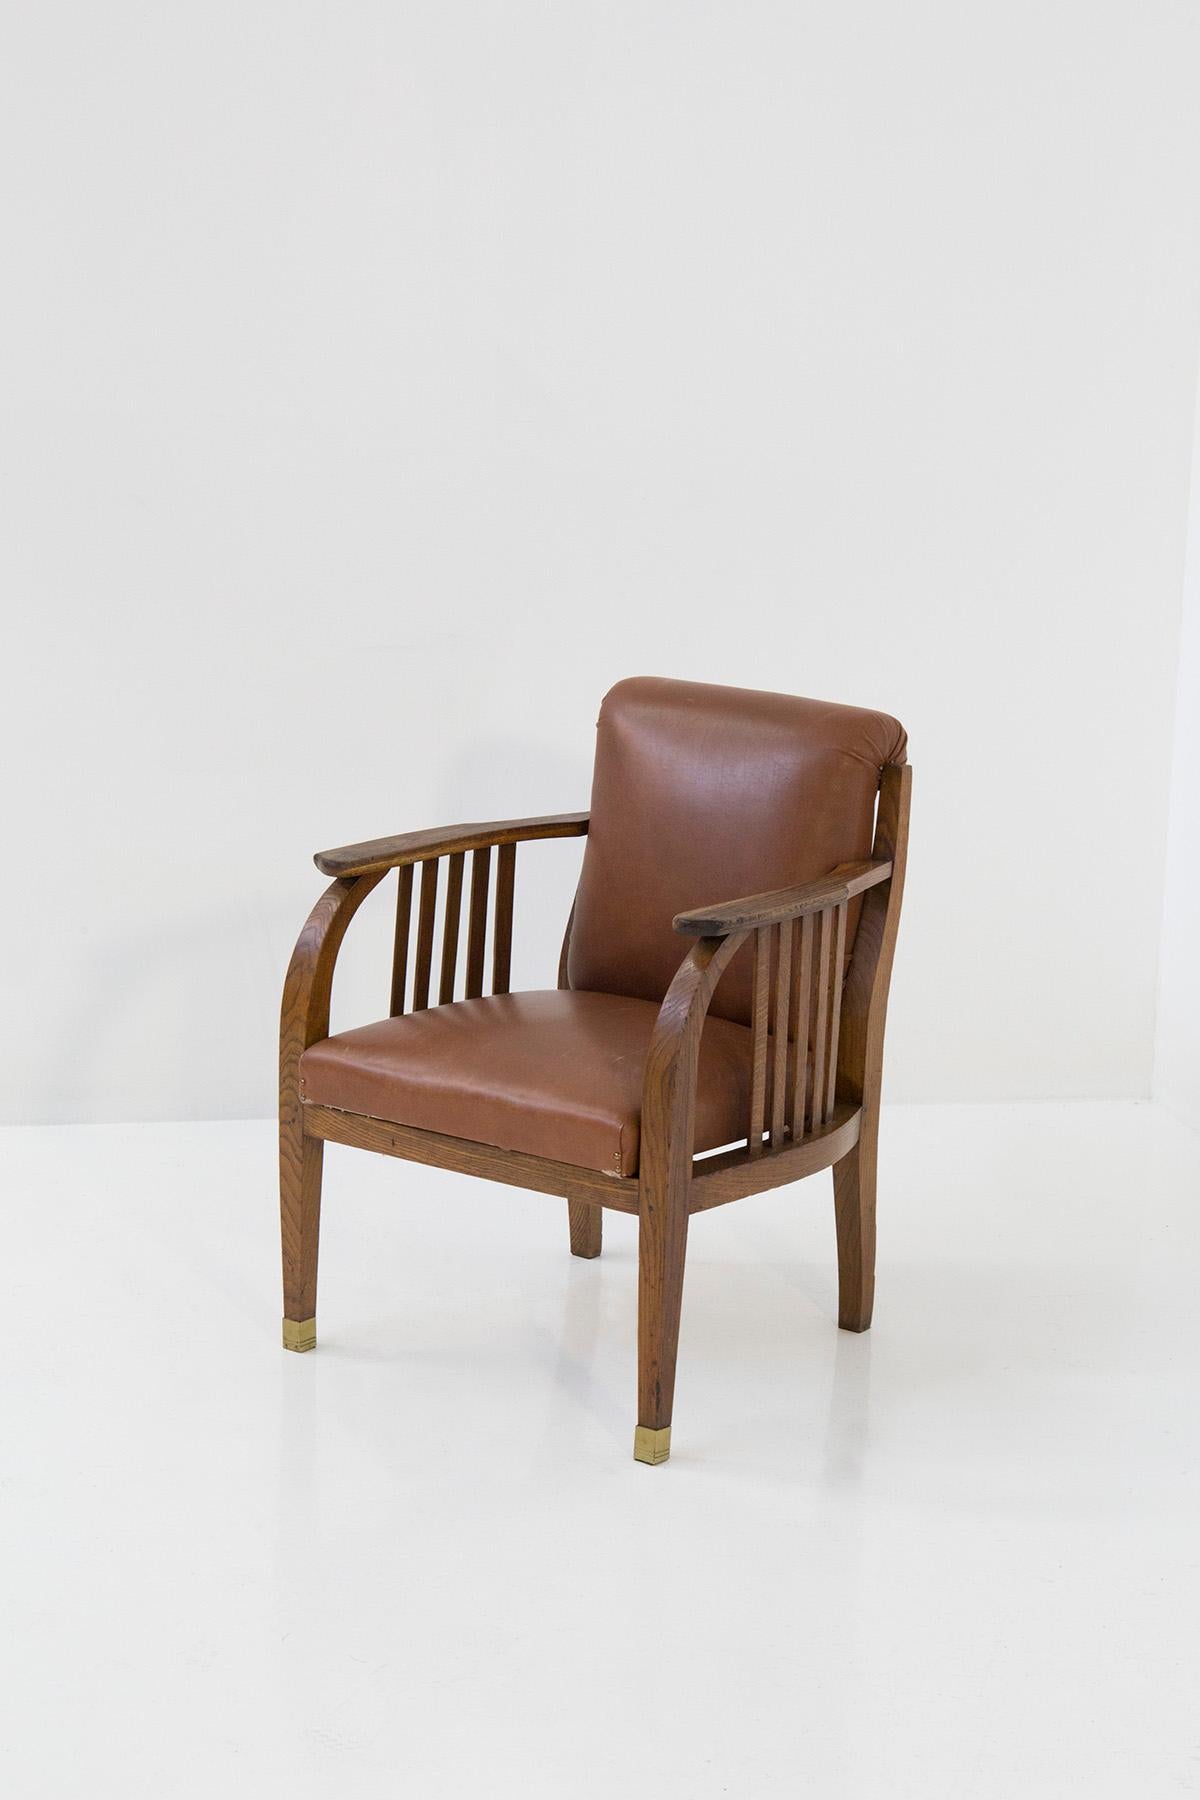 Introducing a Timeless Masterpiece: The Elegant Armchair by Jacob & Josef Kohn

Step into a world of timeless sophistication with our exquisite Elegant Armchair, a tribute to the masterful craftsmanship attributed to the esteemed Attr manufacture,